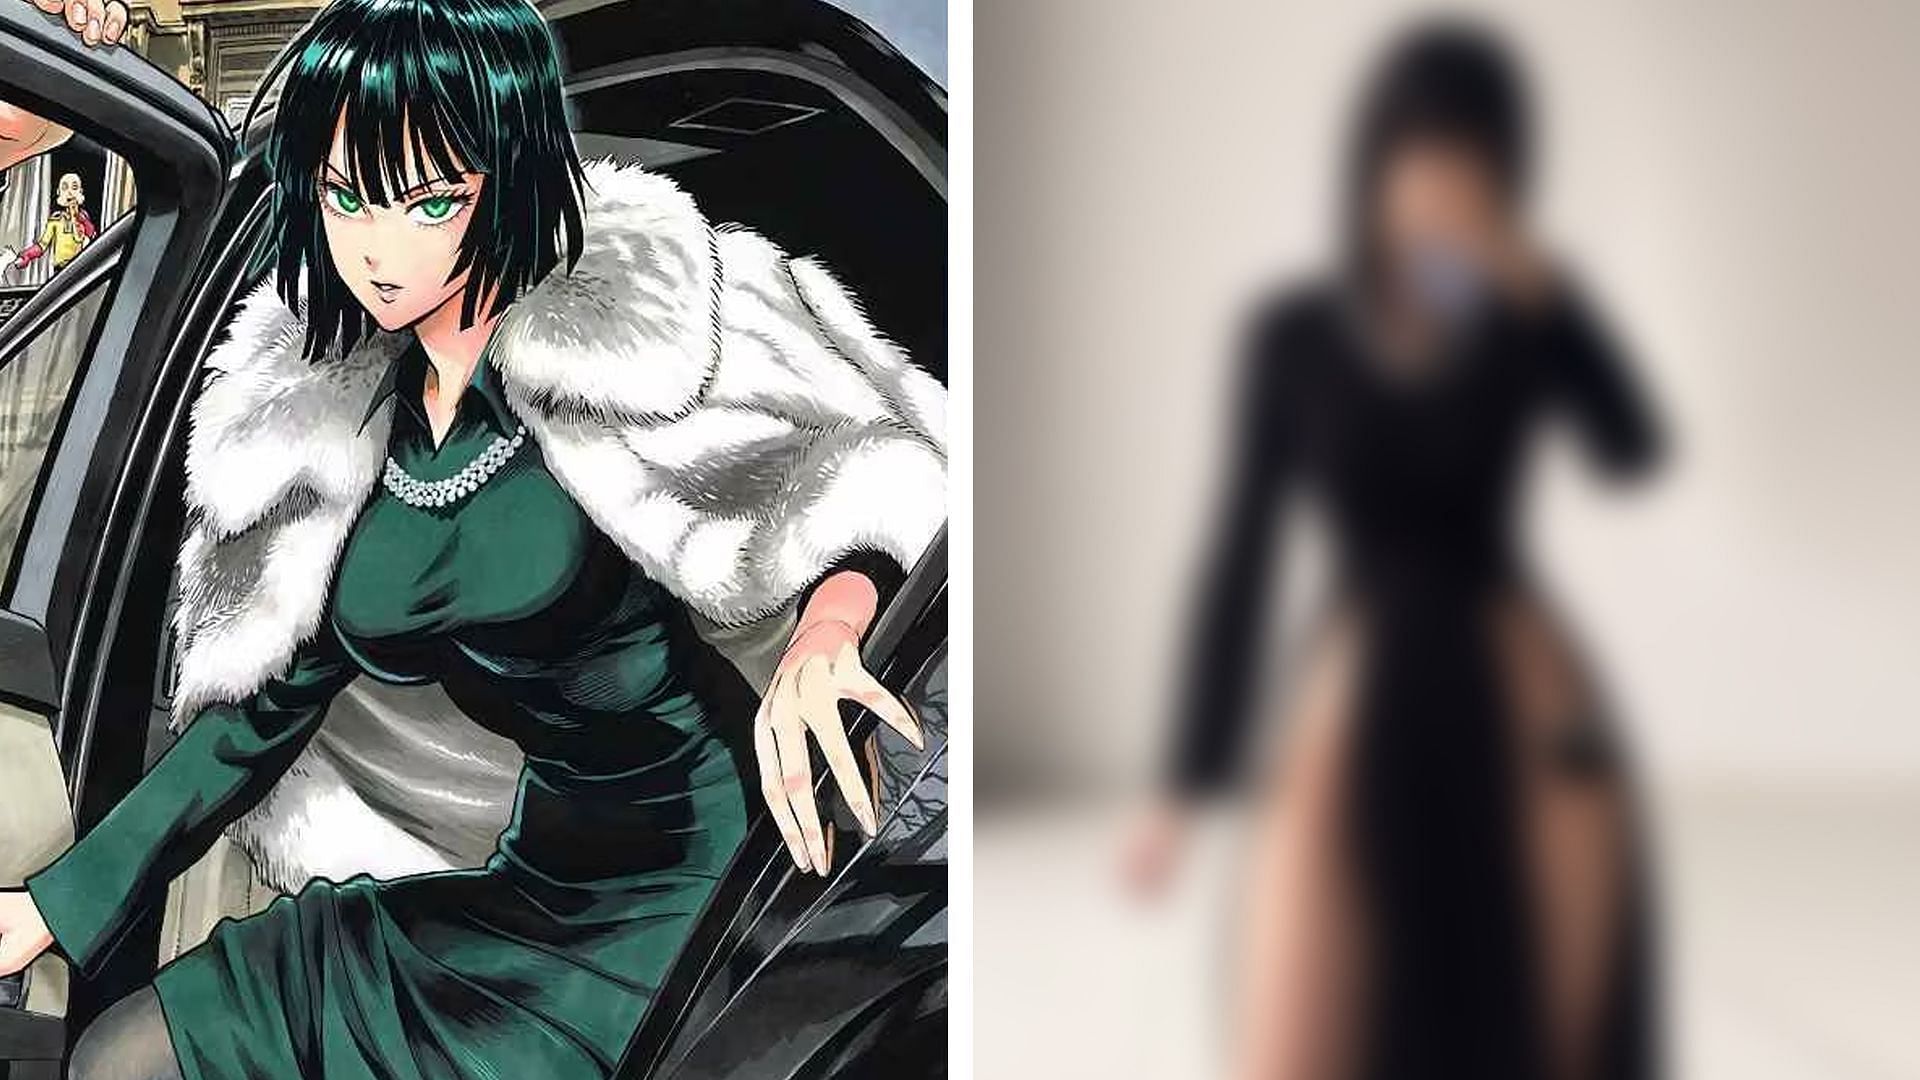 One Punch Man fans are in awe as Fubuki cosplay goes viral on Twitter (Image via Yusuke Murata, Shueisha and Twitter/@Vinnegal)